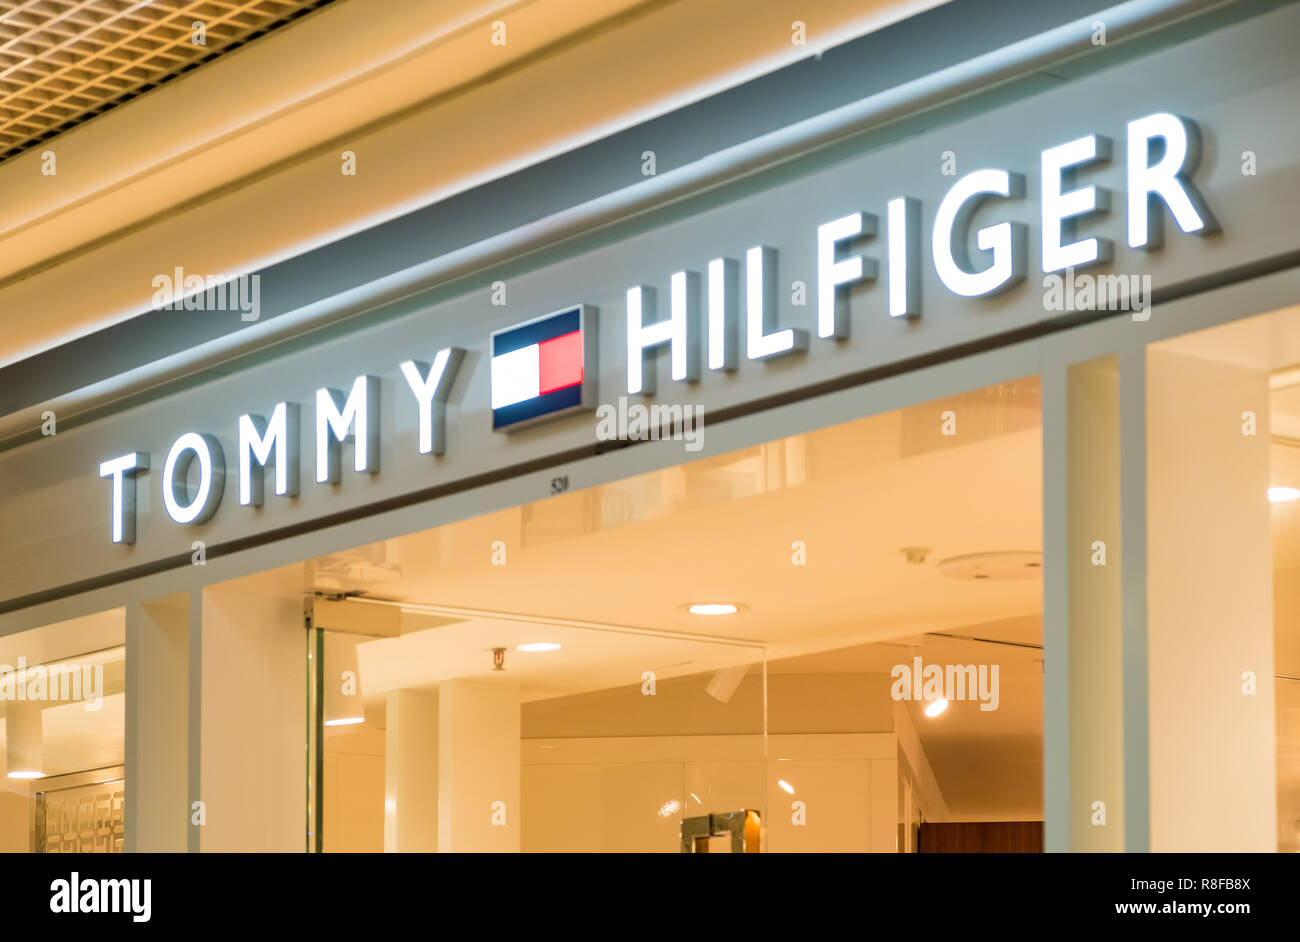 closest tommy hilfiger store